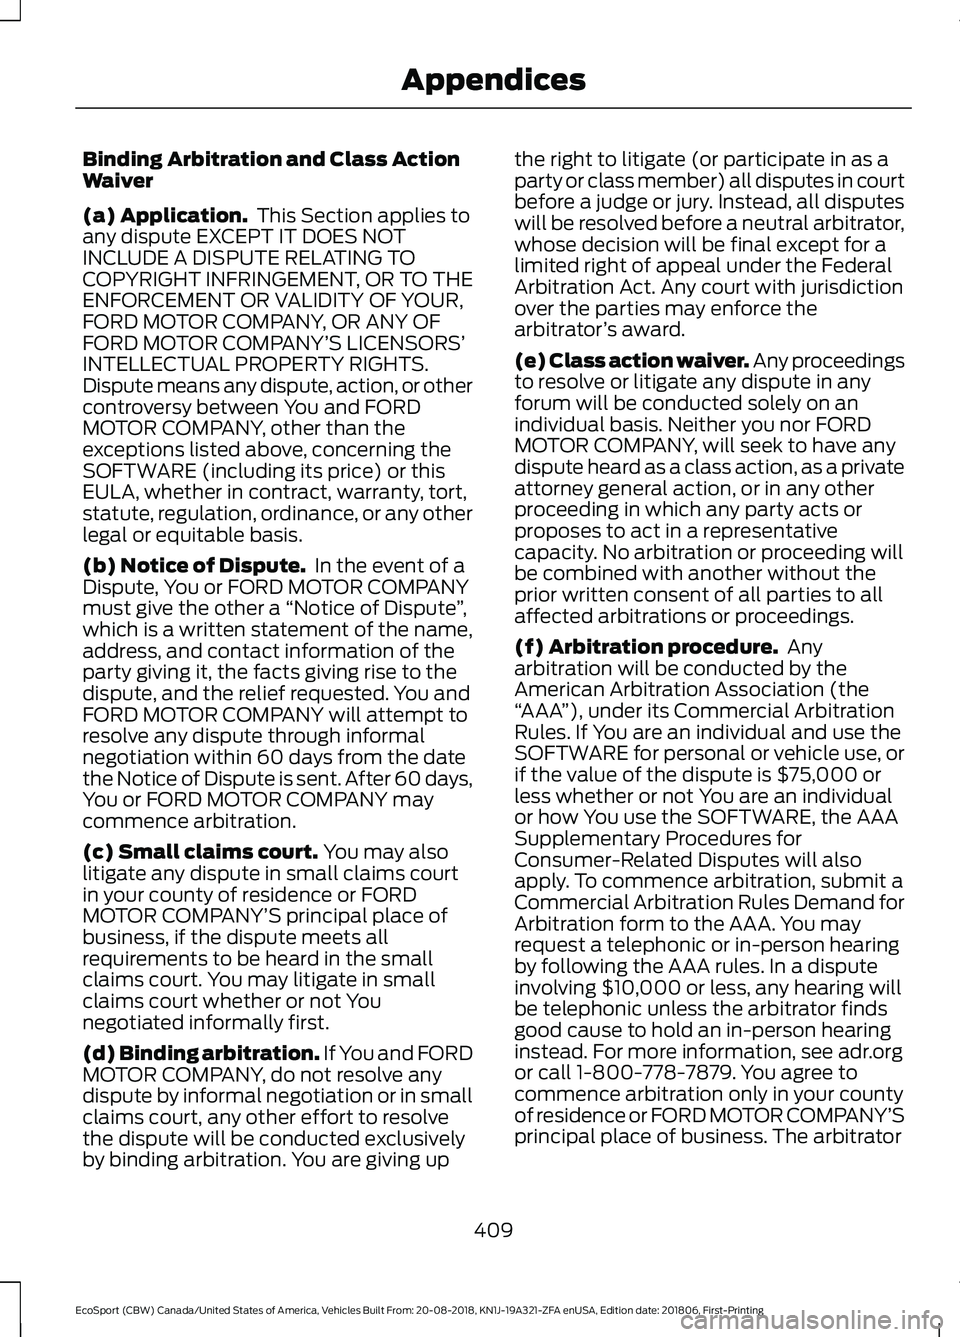 FORD ECOSPORT 2019  Owners Manual Binding Arbitration and Class ActionWaiver
(a) Application. This Section applies toany dispute EXCEPT IT DOES NOTINCLUDE A DISPUTE RELATING TOCOPYRIGHT INFRINGEMENT, OR TO THEENFORCEMENT OR VALIDITY O